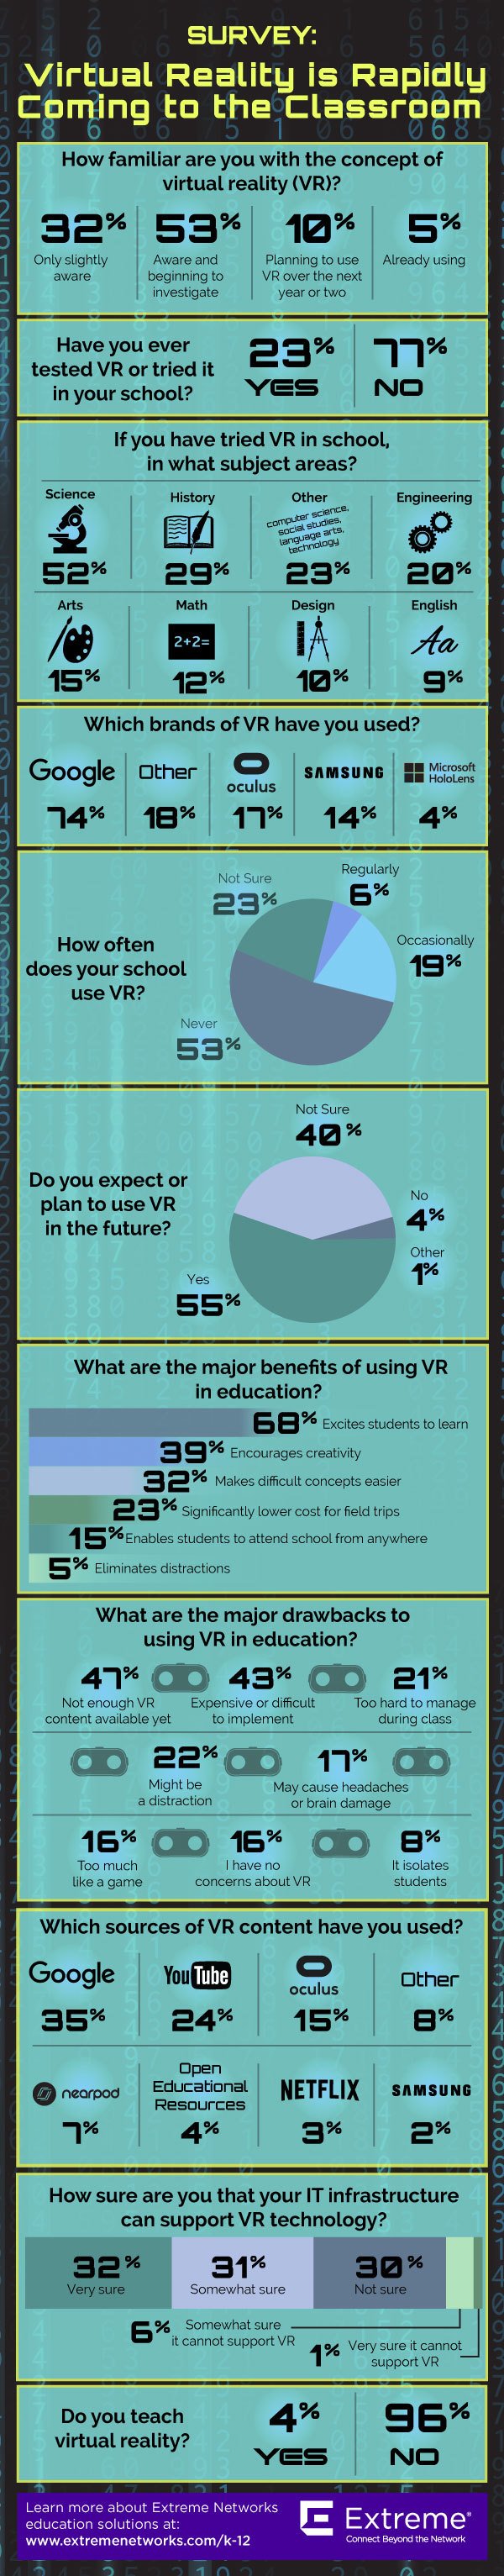 Virtual Reality Is Coming to the Classroom Infographic